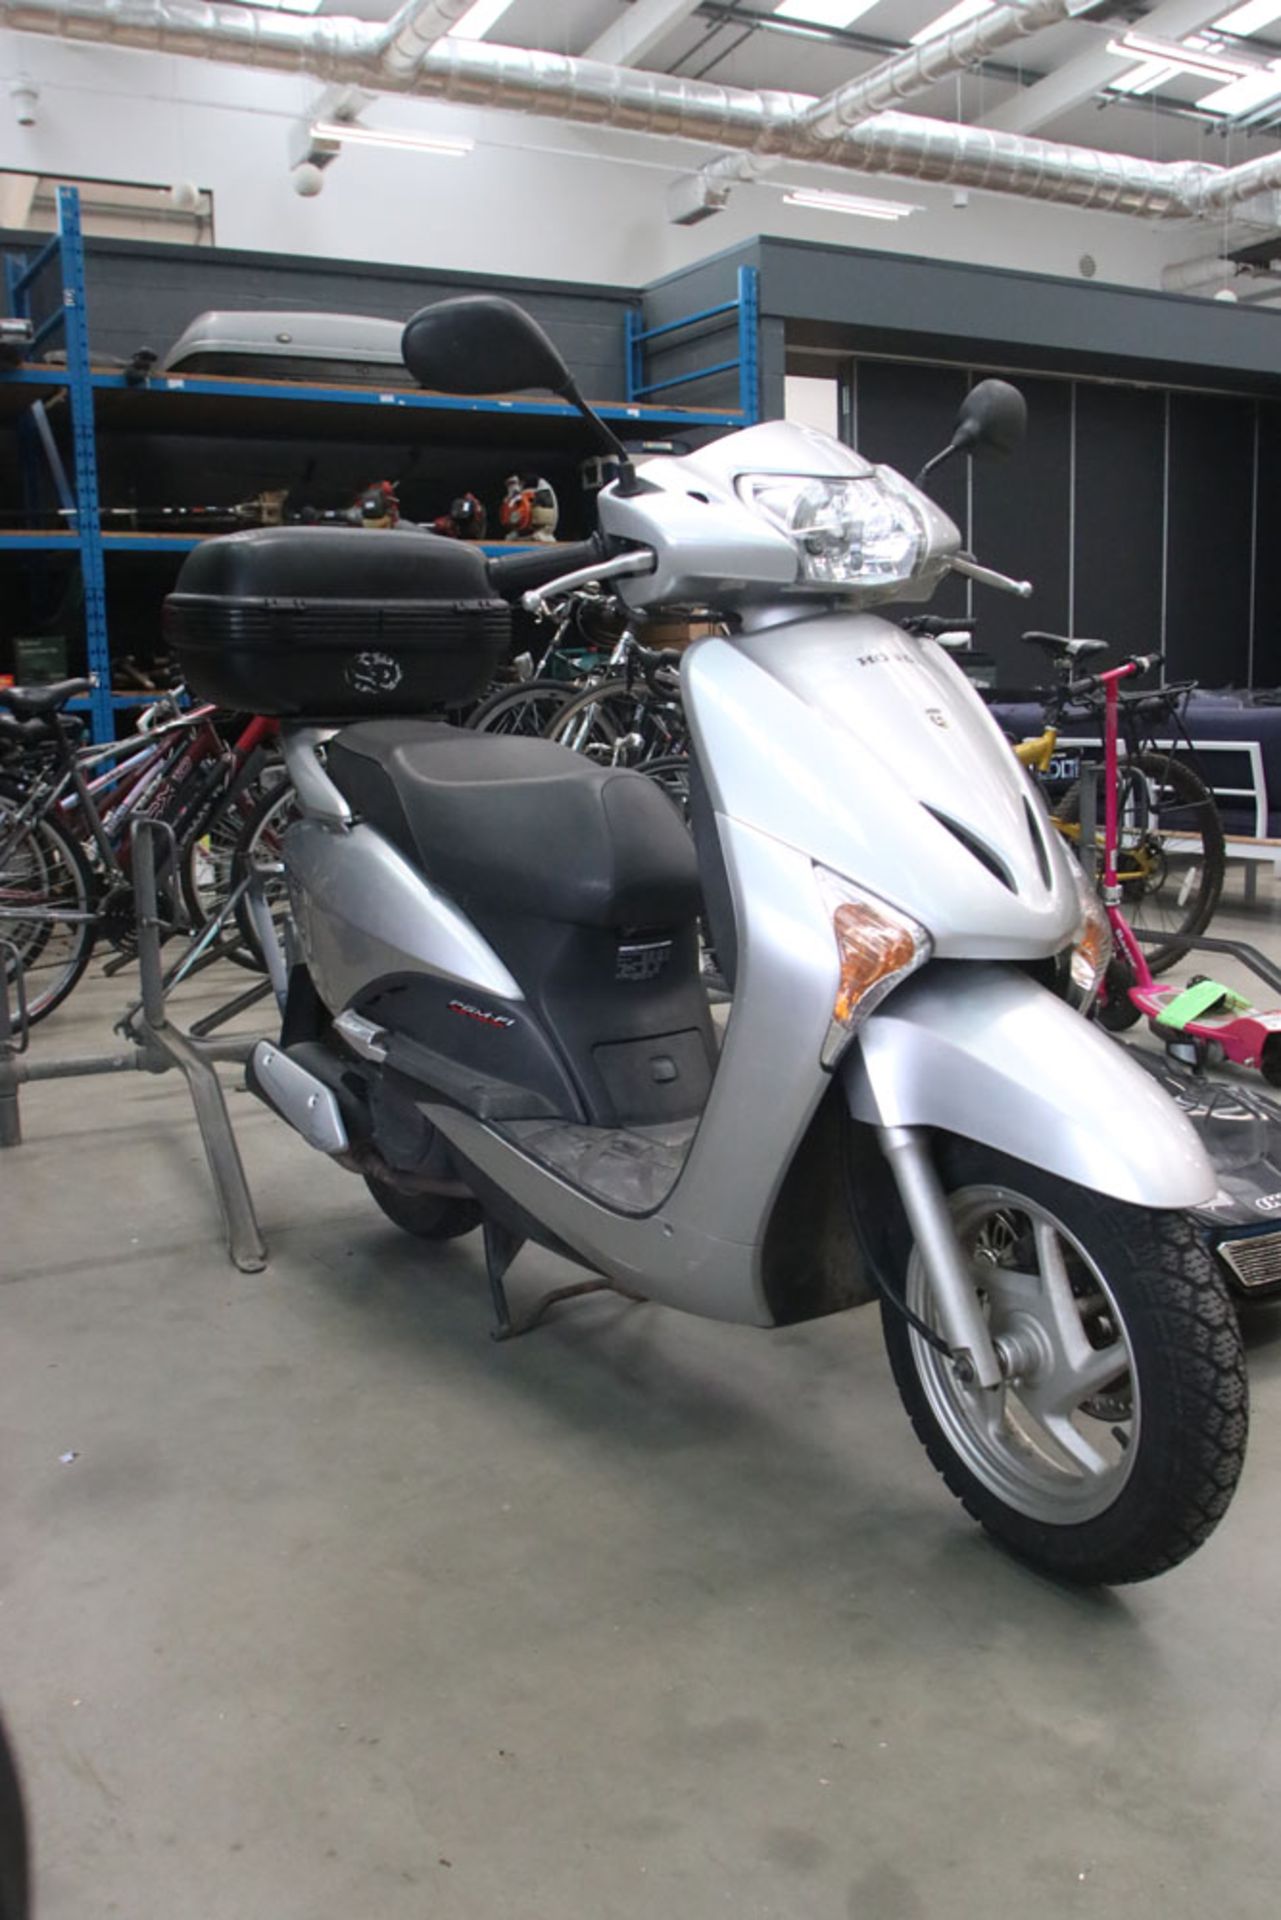 LG59 TBZ (2009) Honda LEAD NHX110 petrol 108cc powered scooter in silver, with MOT until 27/09/22